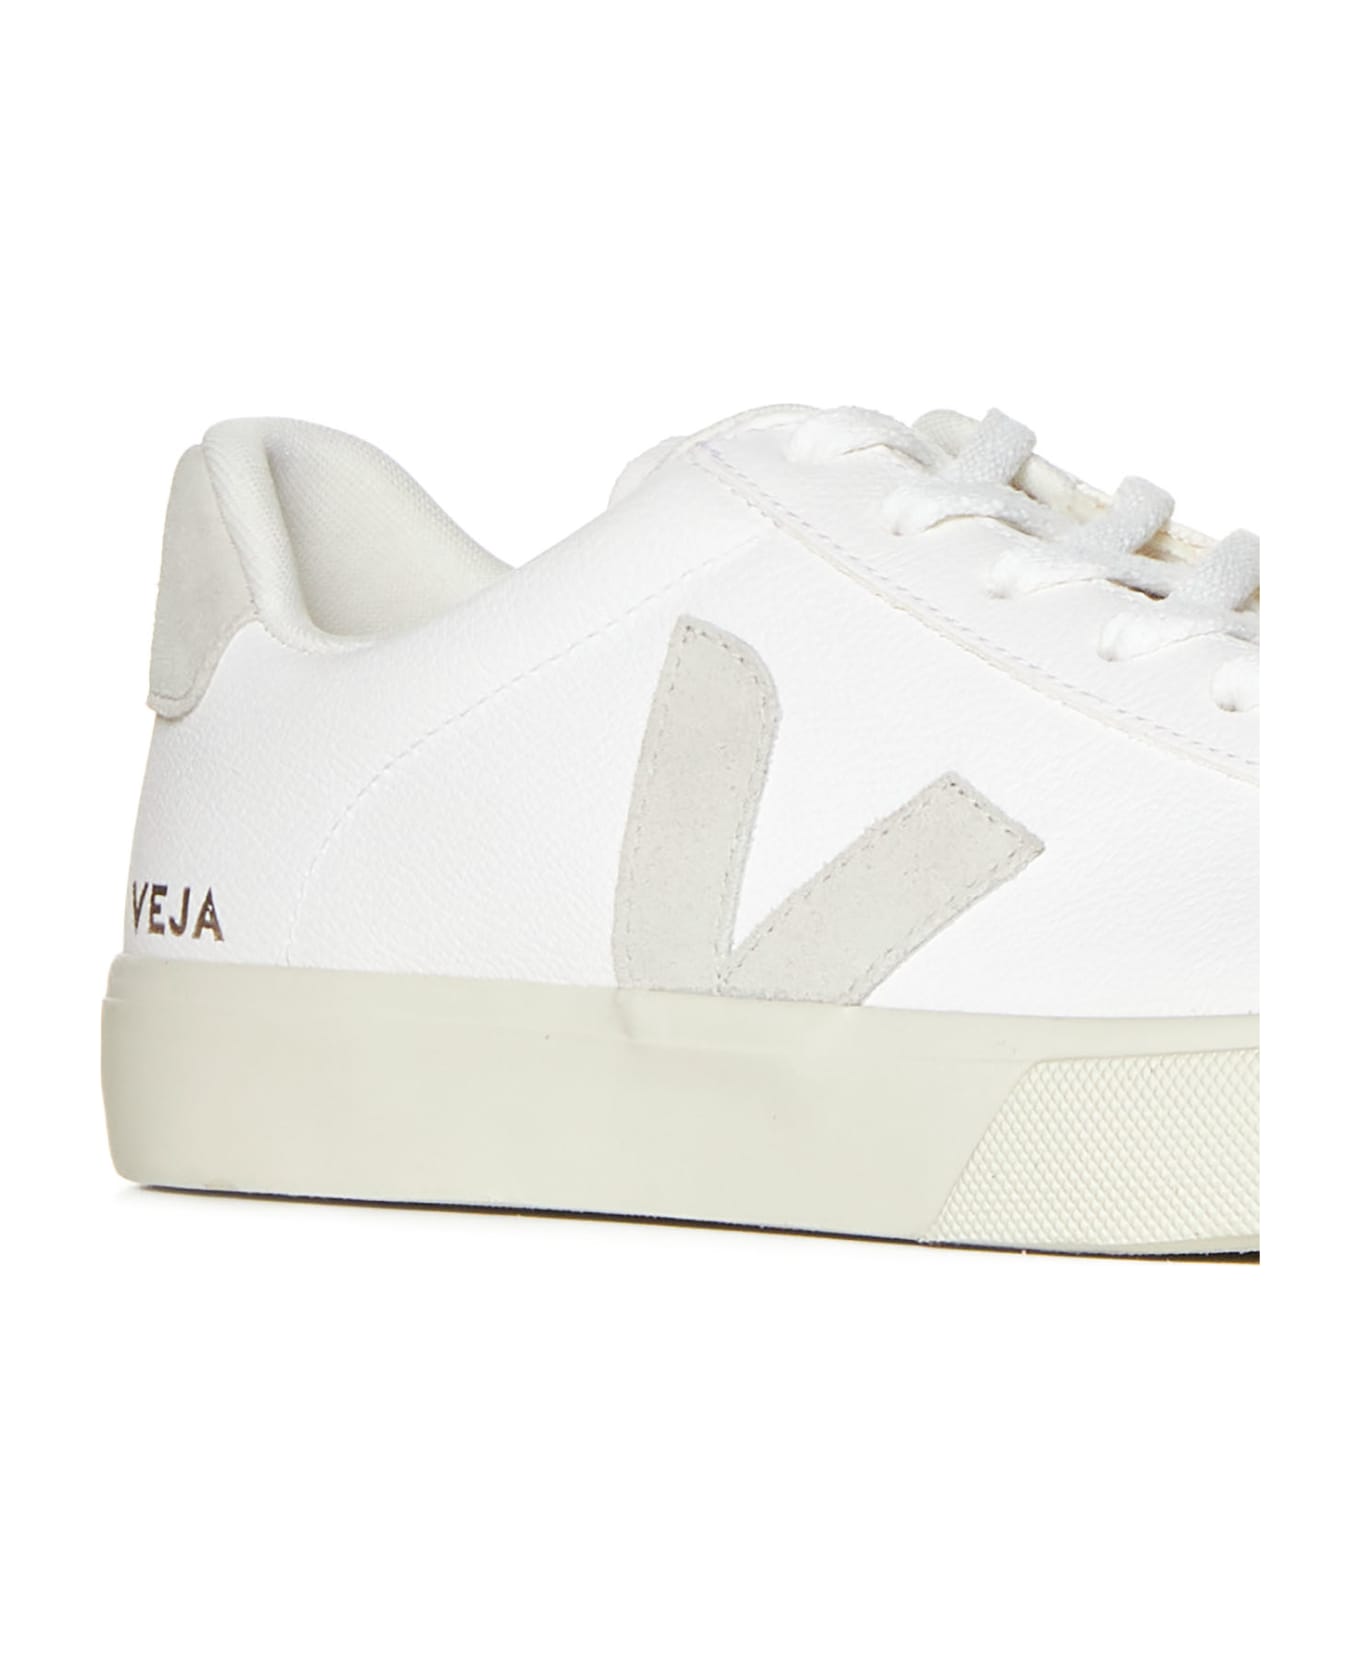 Veja Sneakers - EXTRA-WHITE_NATURAL-SUEDE